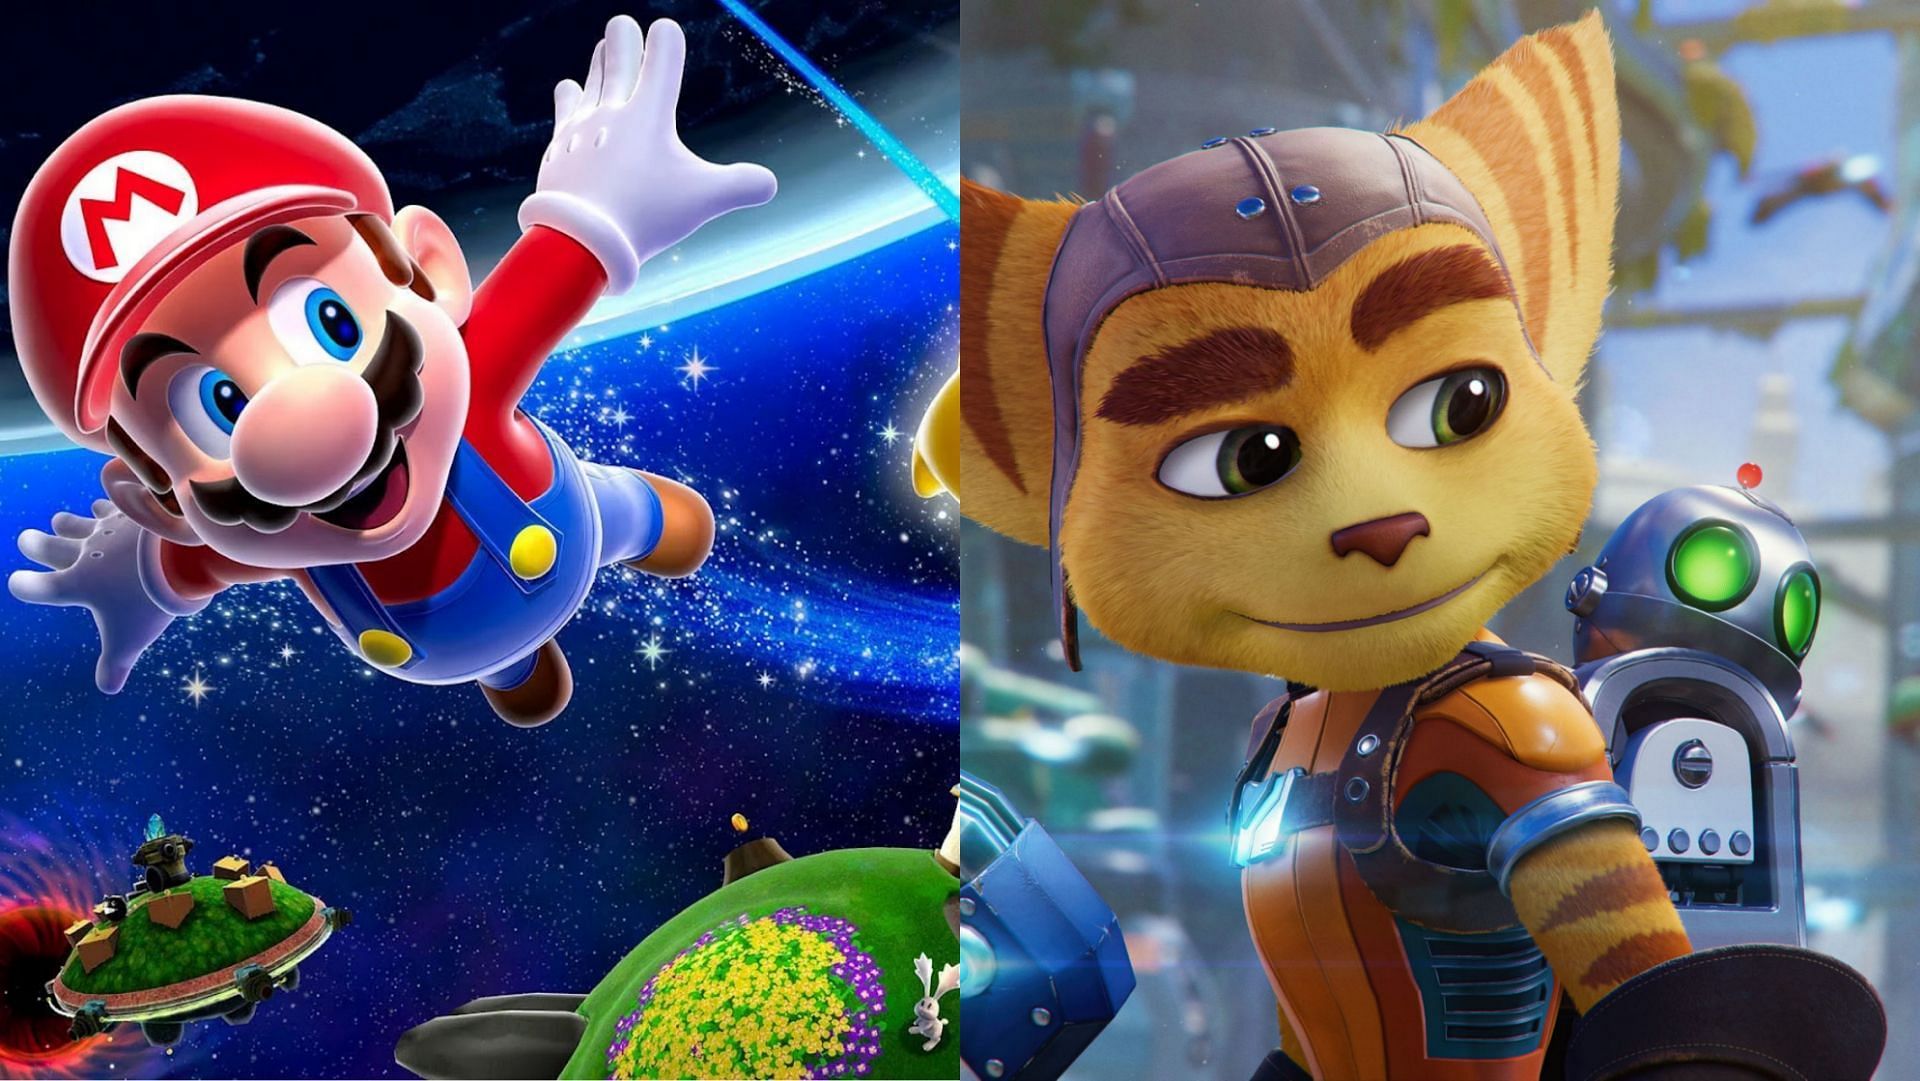 3D platformers really blew up in the 2000s, but which are the best from that era, and the best of all time? (Image via Nintendo &amp; Insomniac Games)